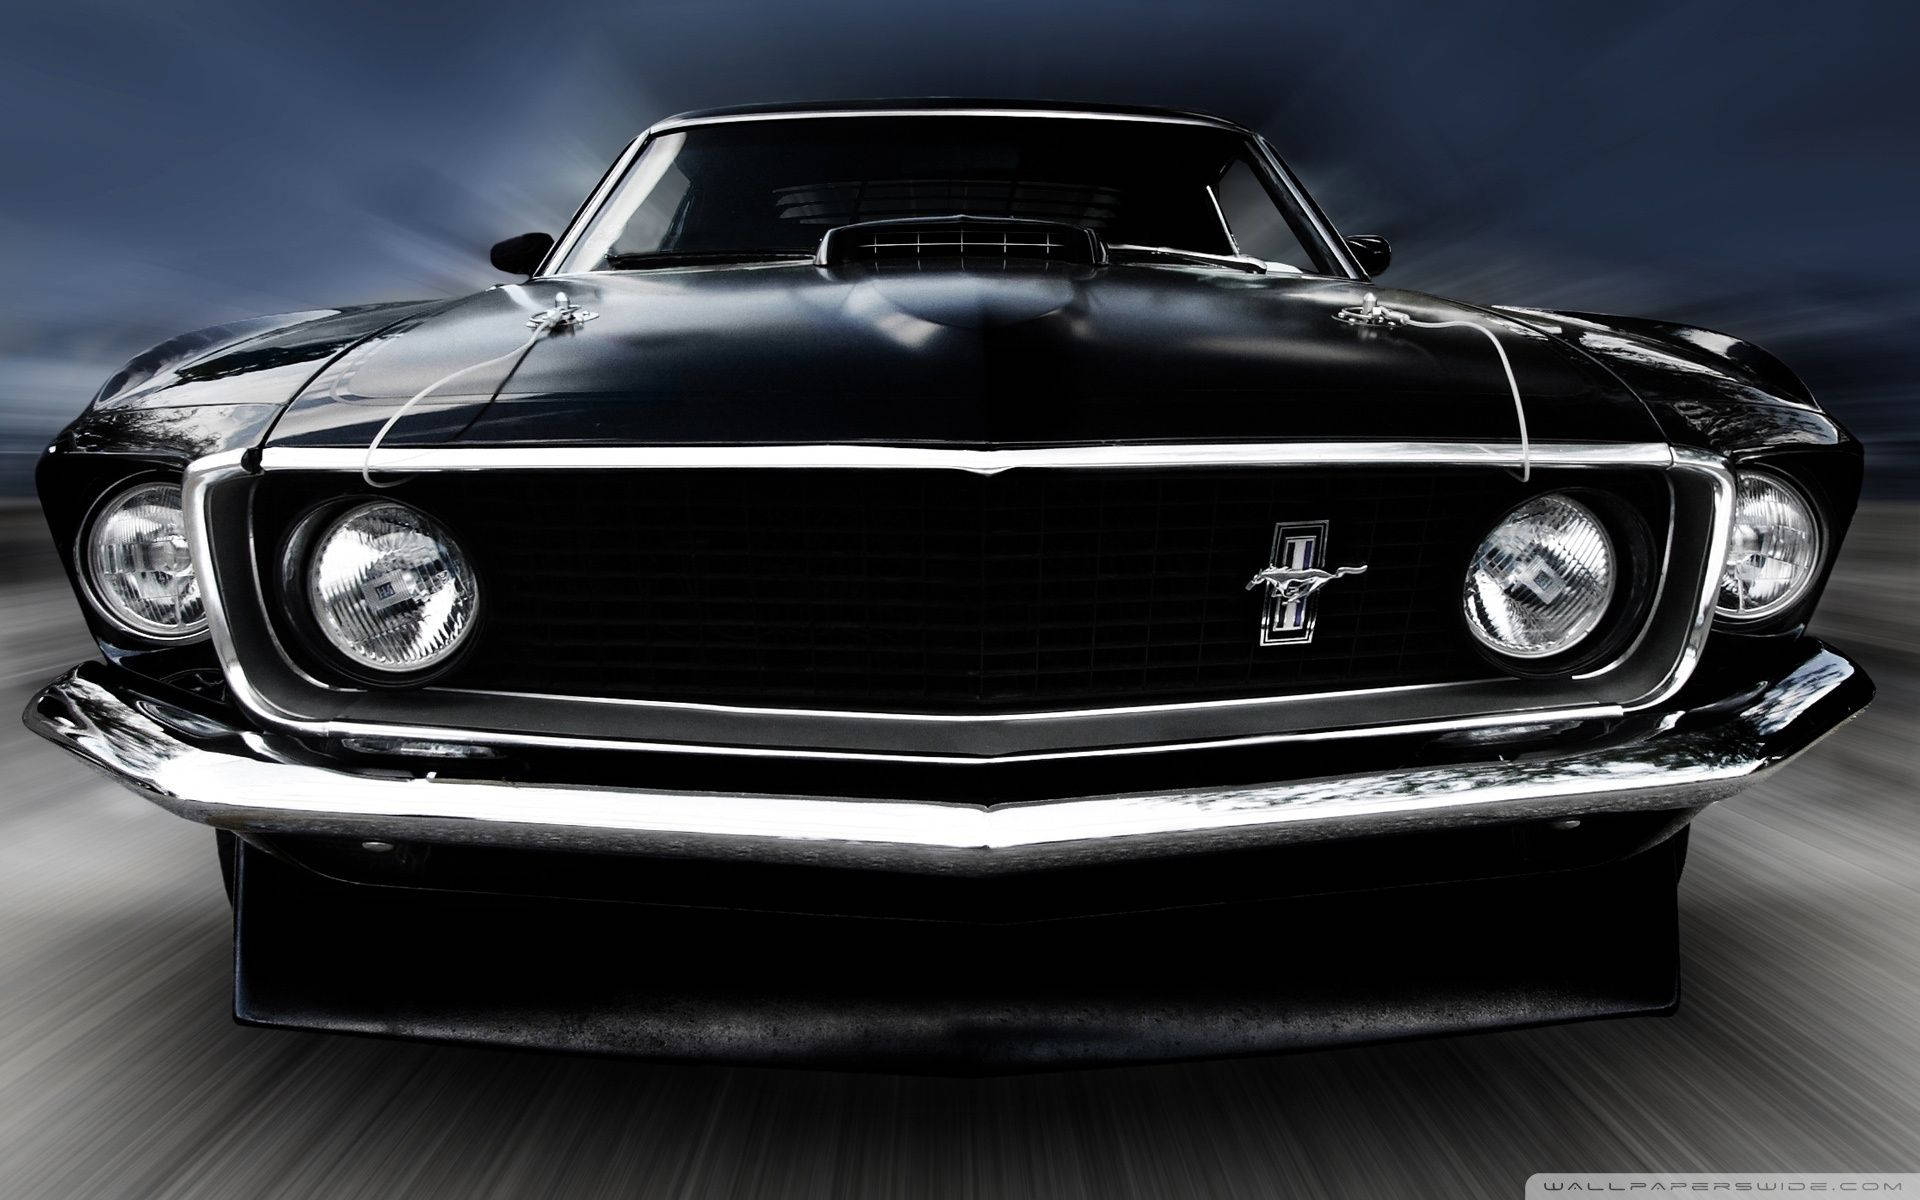 Black Ford Mustang 1969